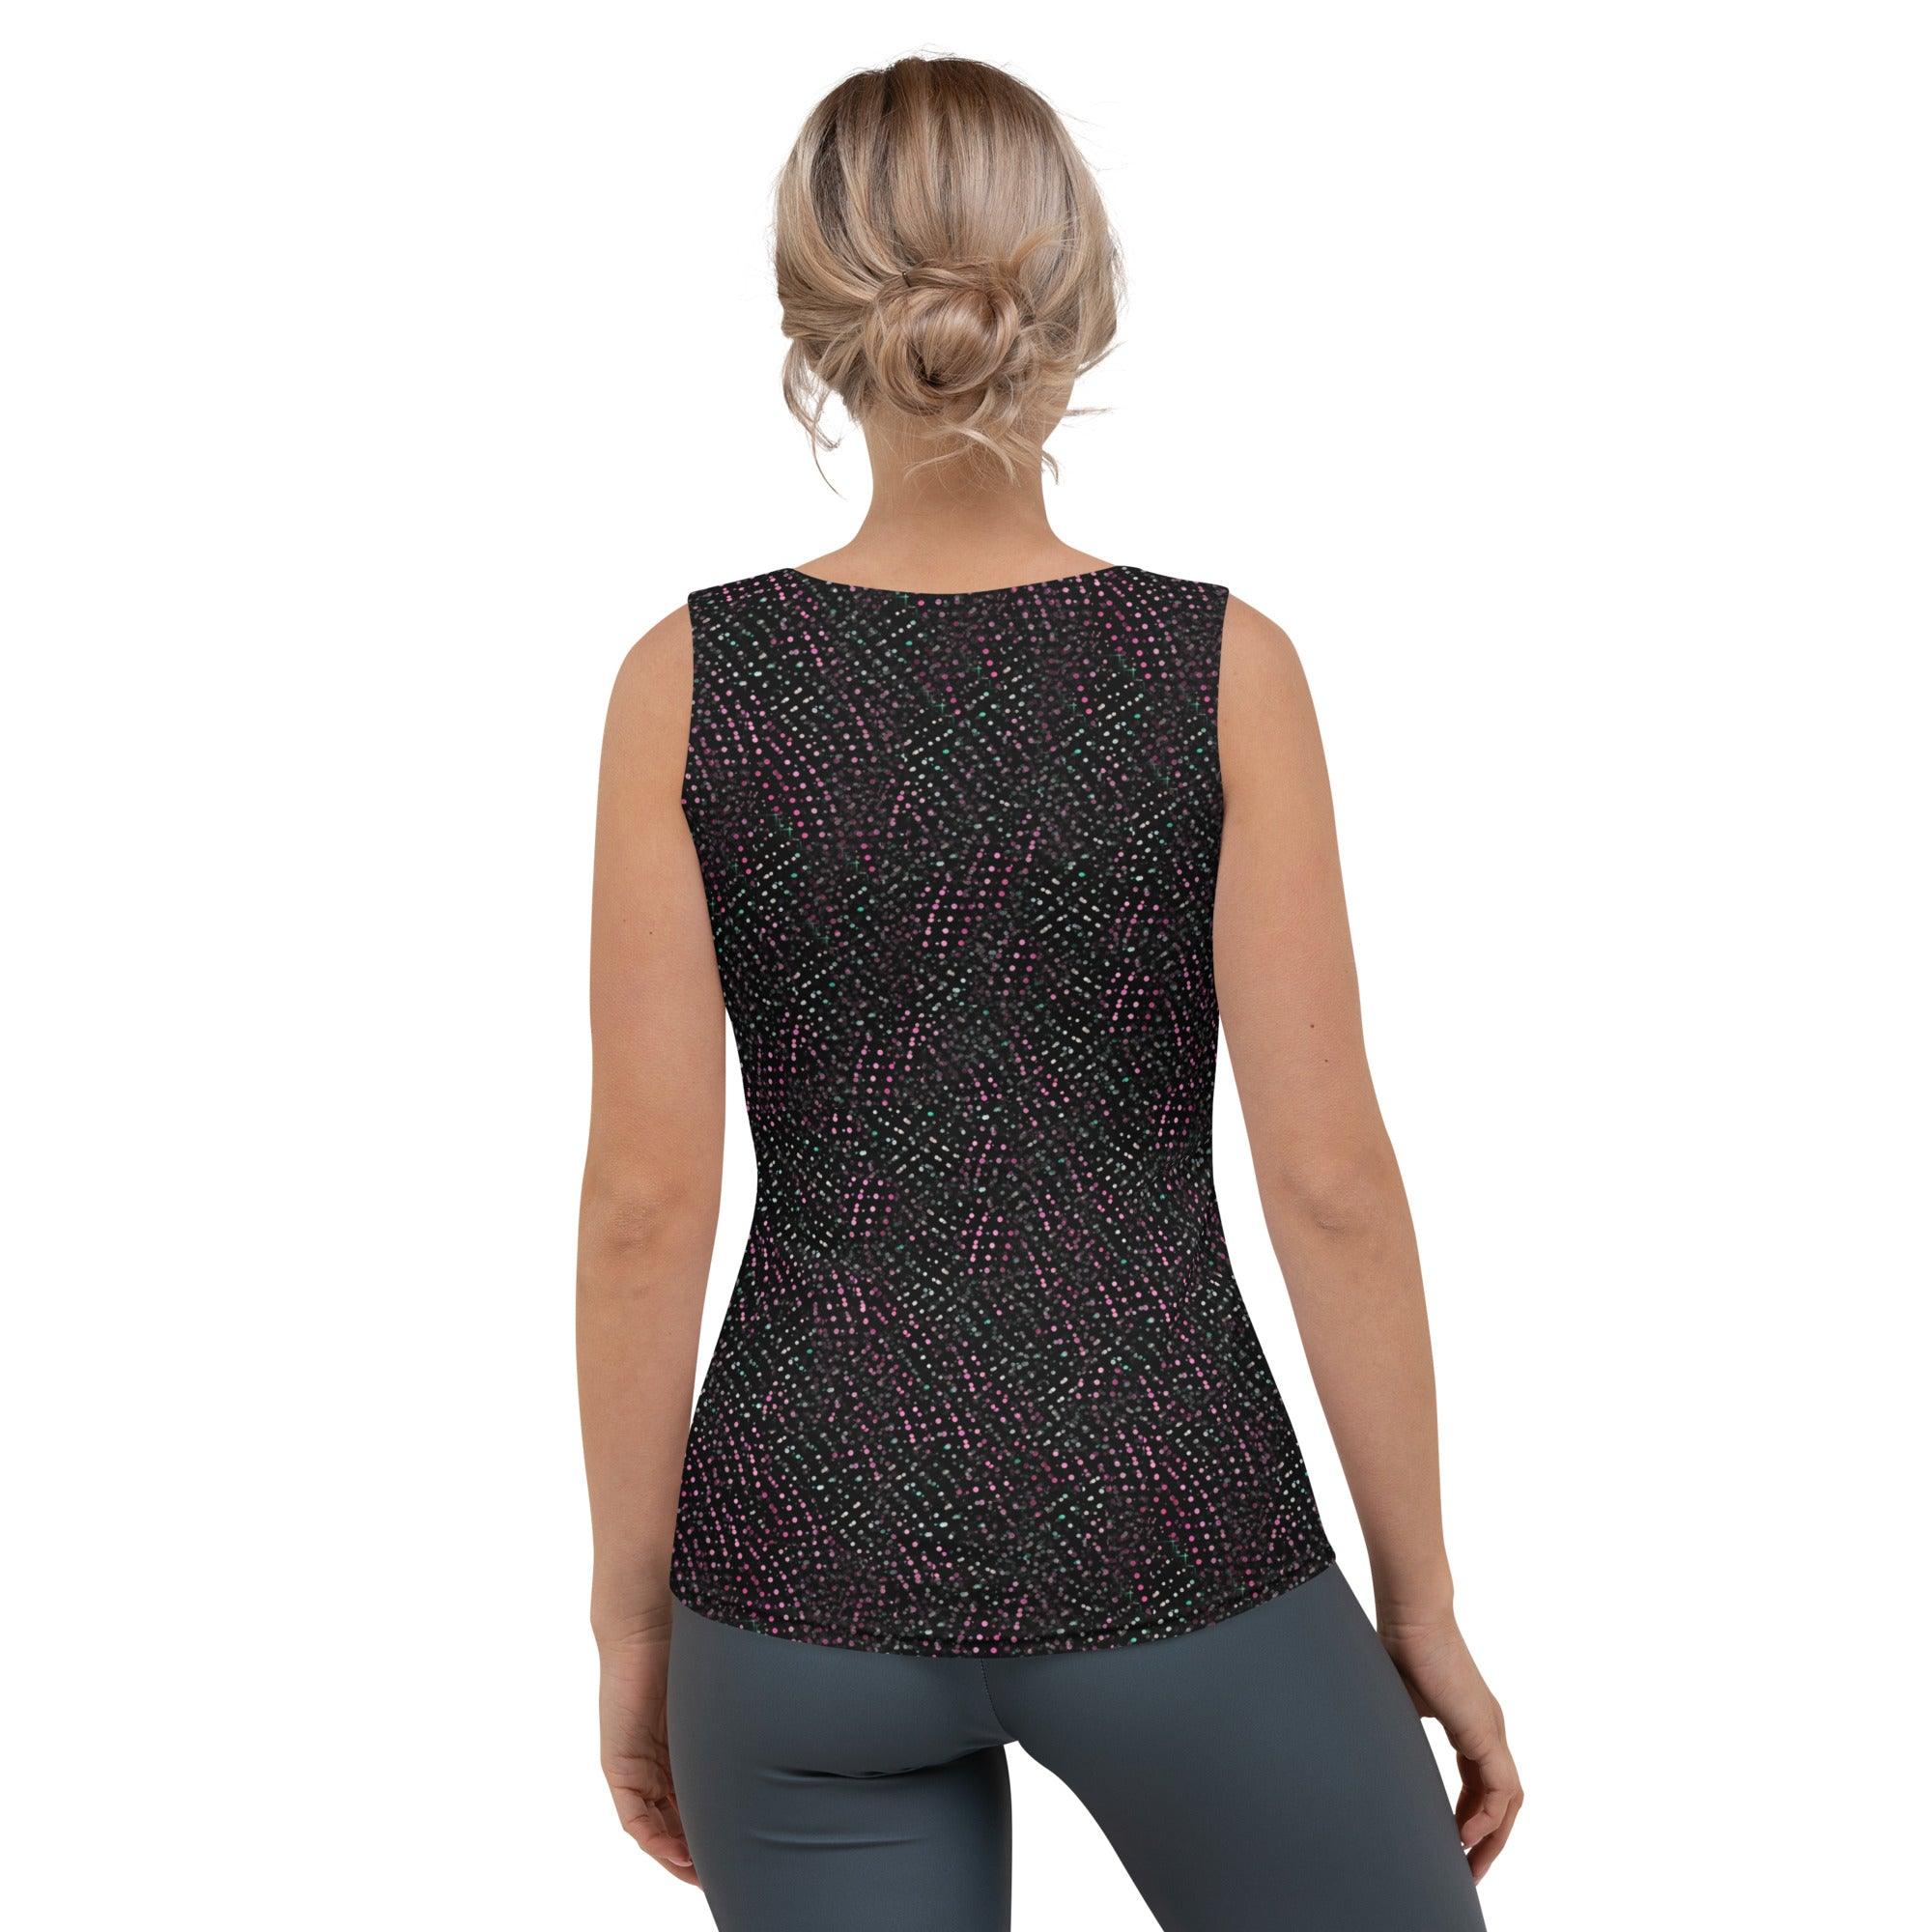 Chic Cut & Sew Tank Top with Balletic Fashion Design